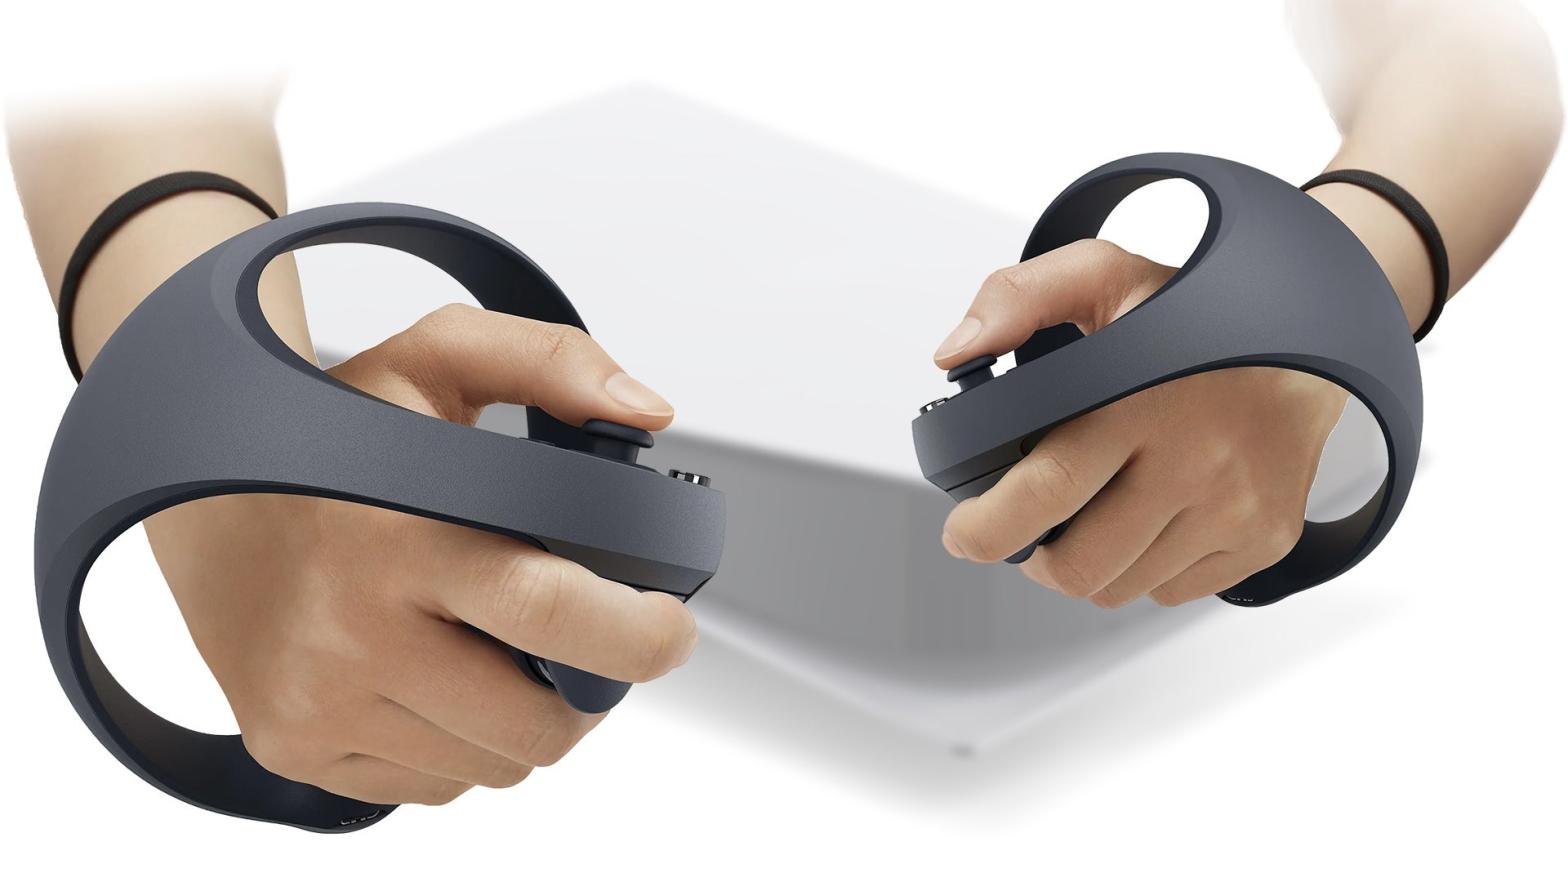 Sony's next-gen PlayStation VR controllers support inside-out tracking and a couple types of haptics. (Image: Sony / Kotaku)